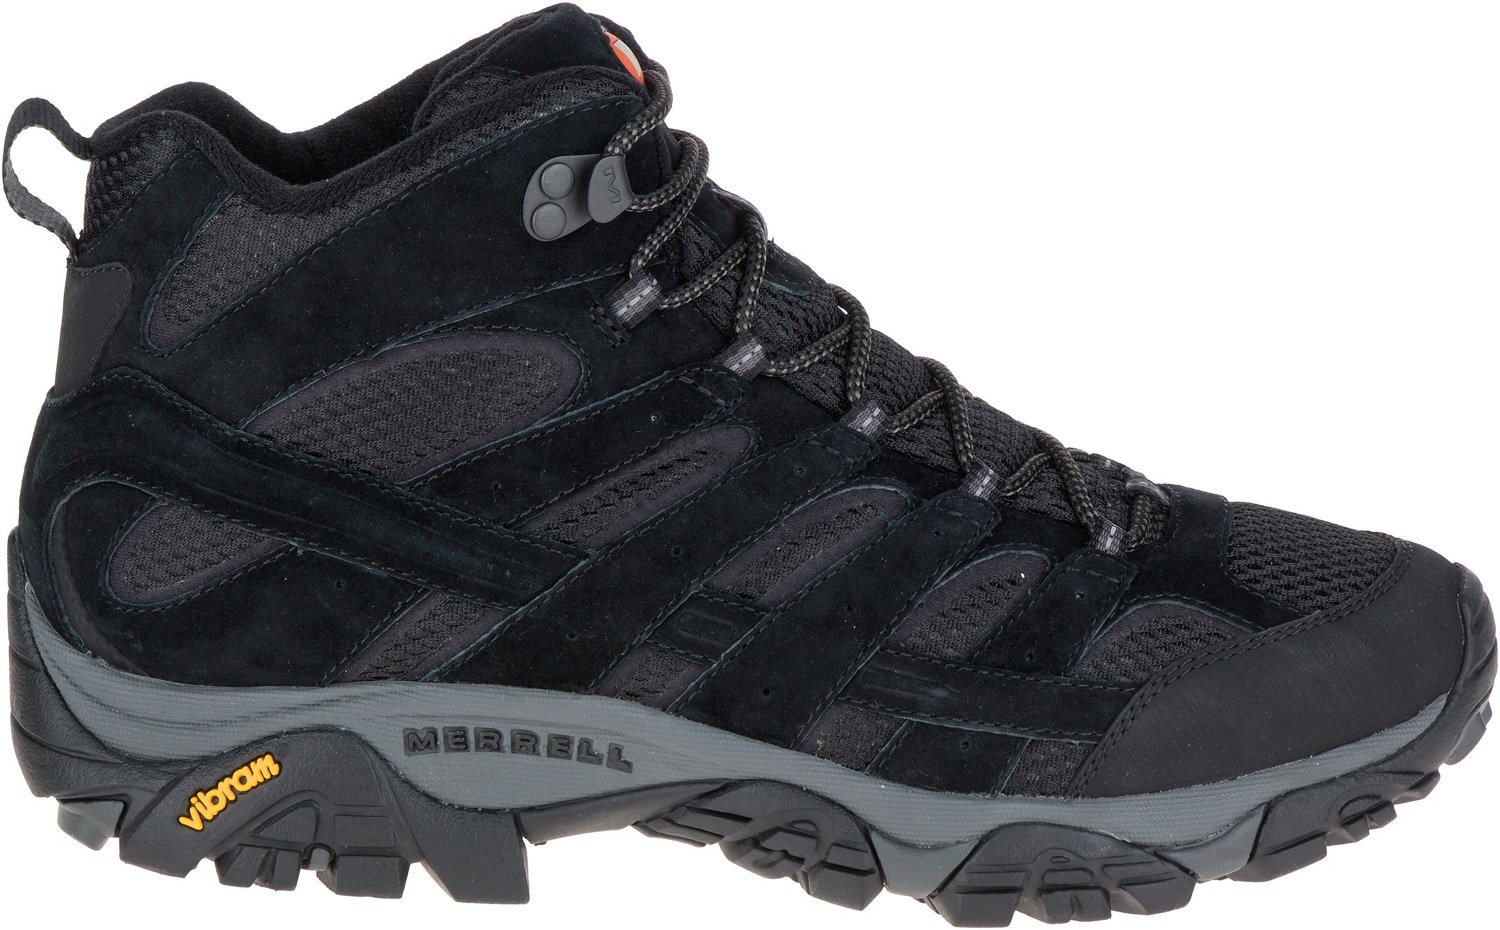 Merrell Men's Moab 2 Mother of All Boots Mid Ventilator Hiking Boots ...